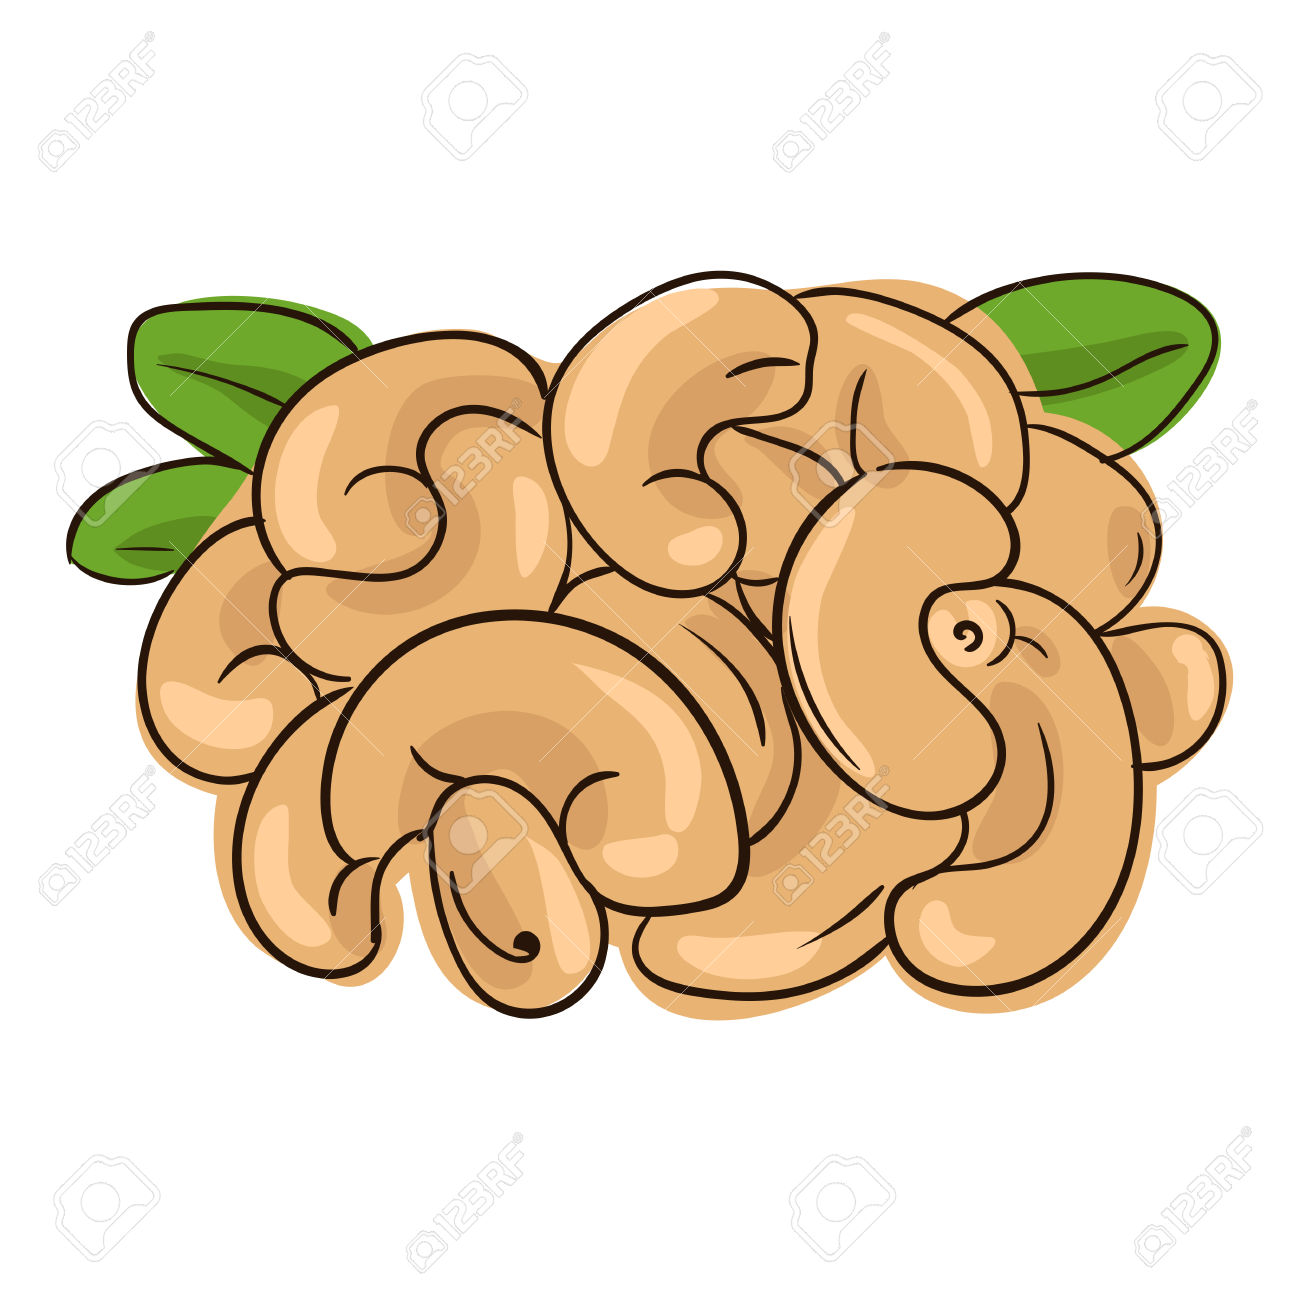 clipart of tree nuts - photo #26